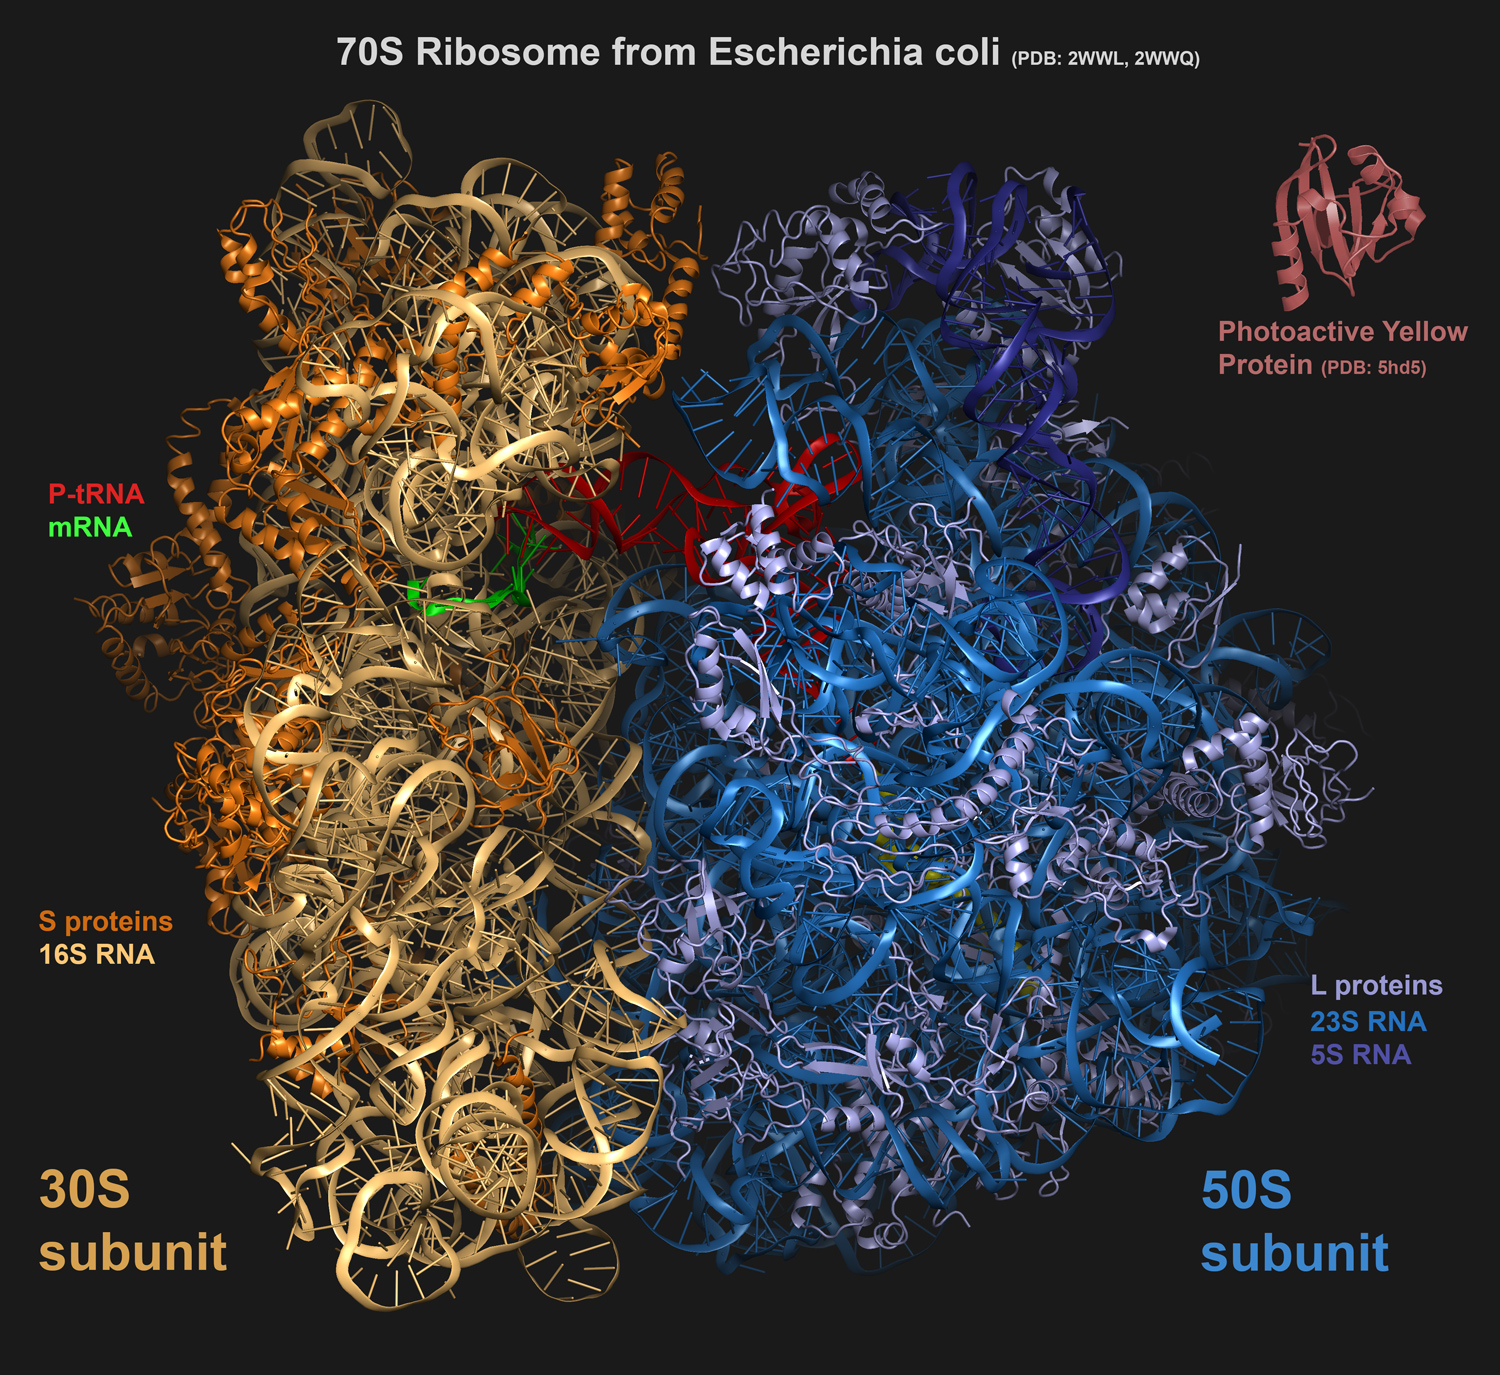 The size of a 70S ribosome structure compared to a protein